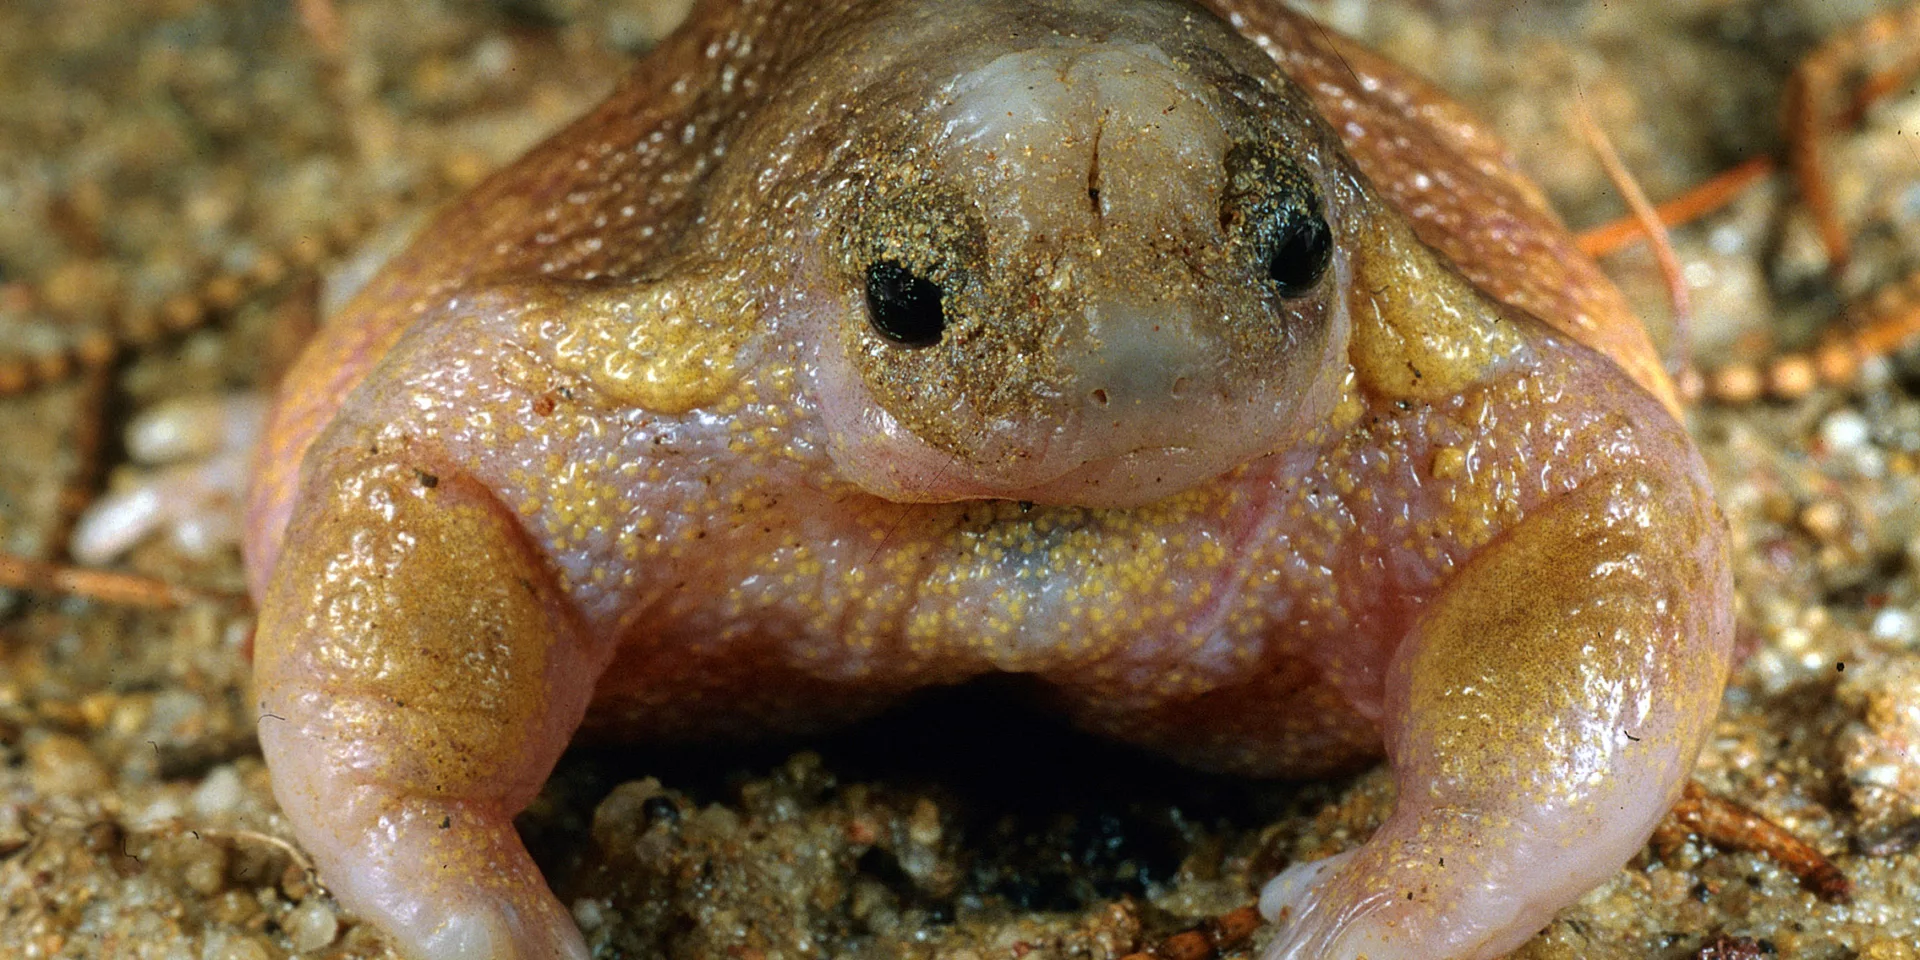 Native Frogs are essential to healthy ecosystems